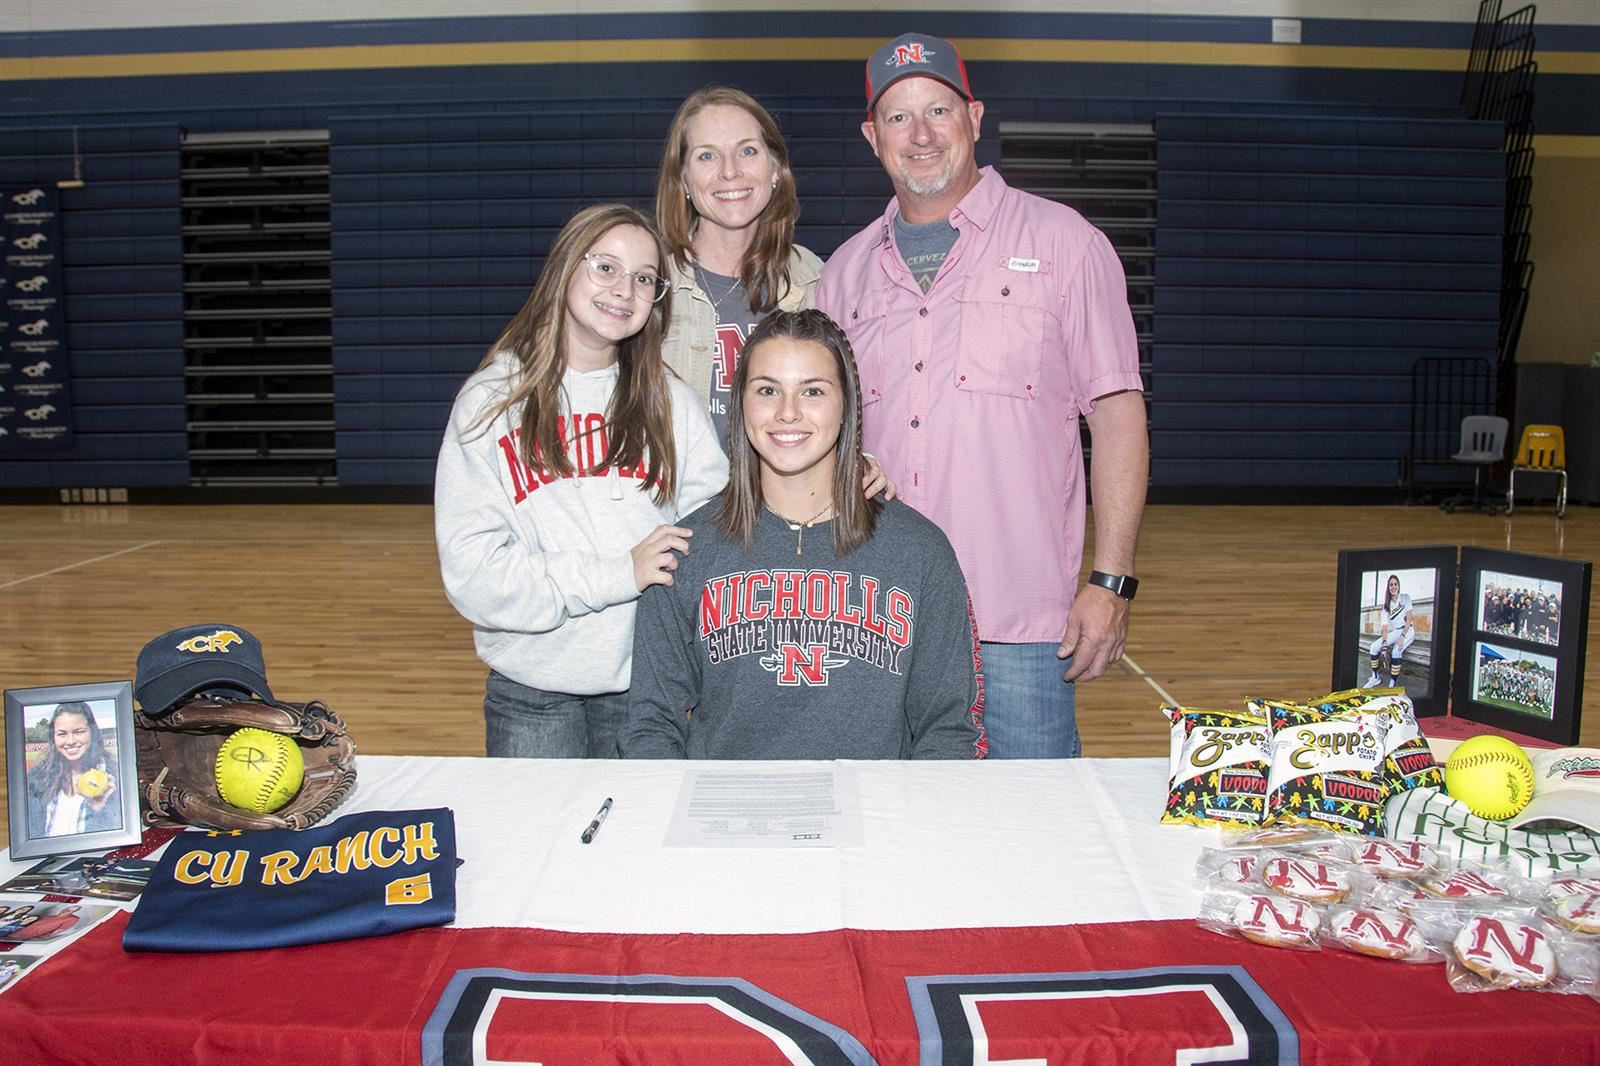 Cypress Ranch senior Molly Yoo, seated, poses with her parents after signing her letter of intent to Nicholls State.